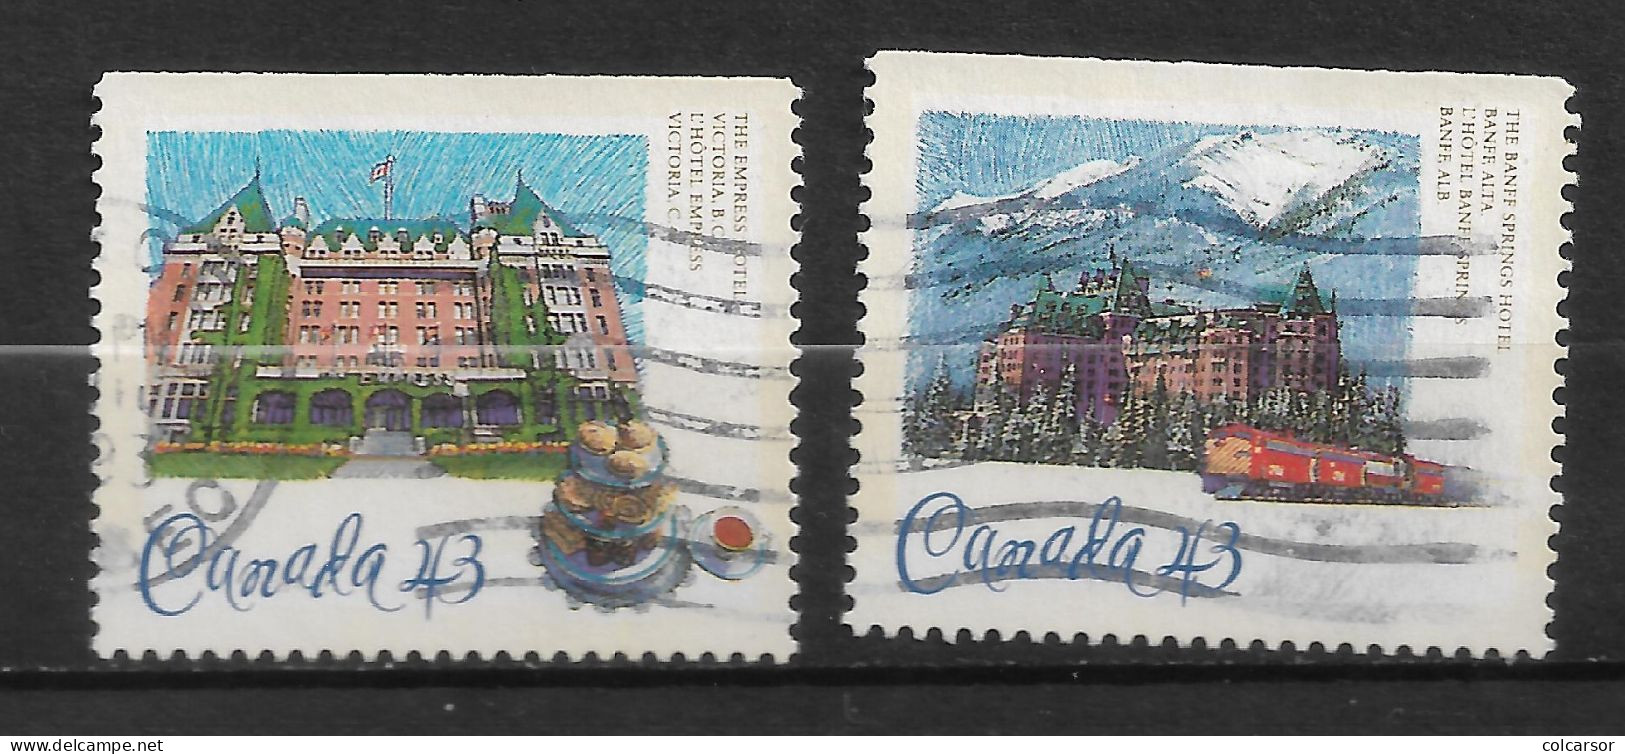 "CANADA  N° 1311/12  " HOTELS " - Used Stamps